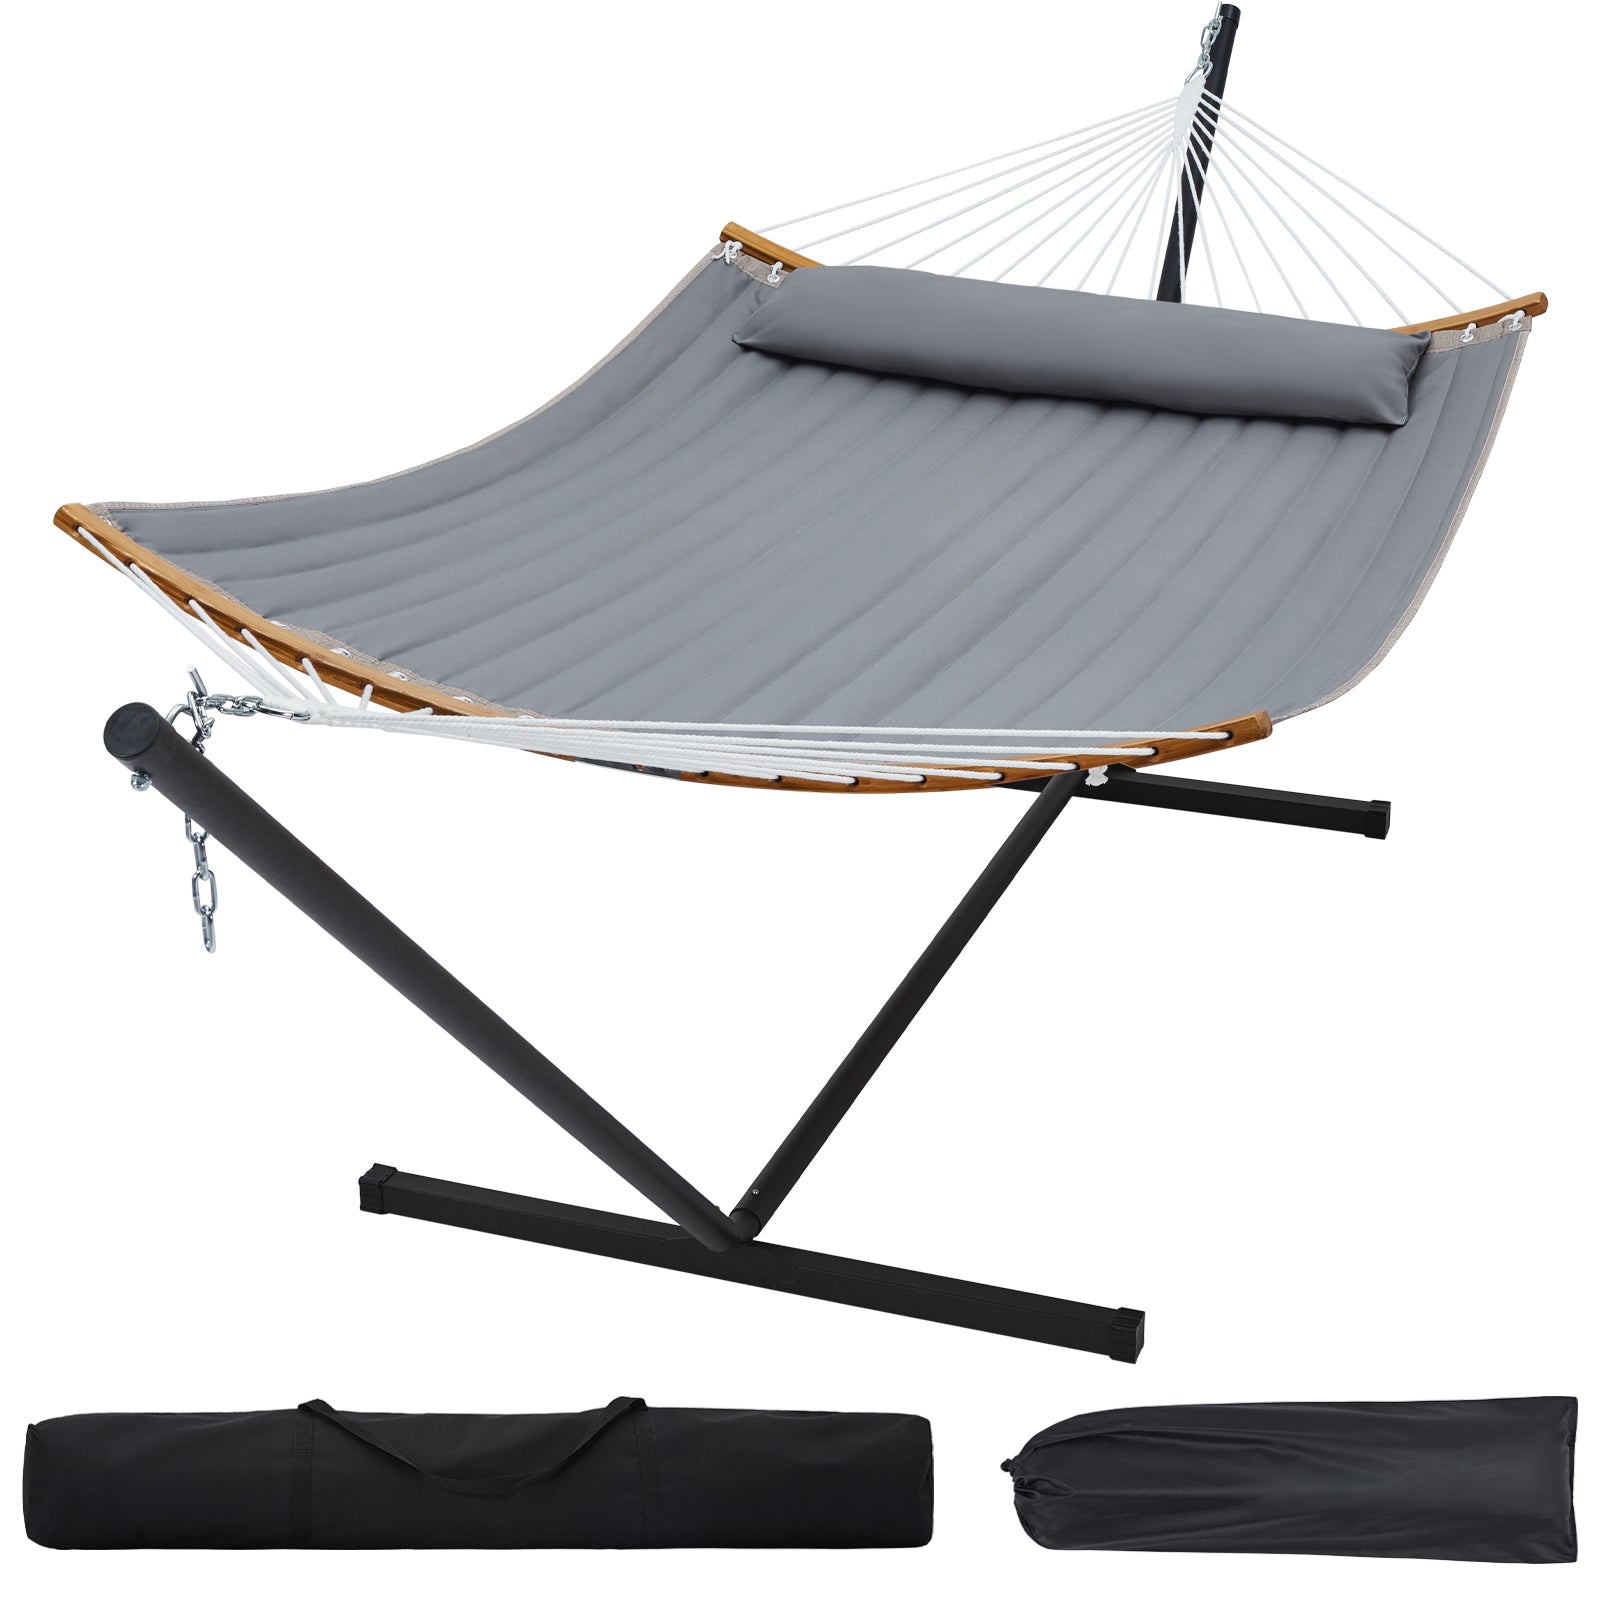 SUPERJARE 12FT Double Hammock with Stand, Gray - 3702B - SUPERJARE